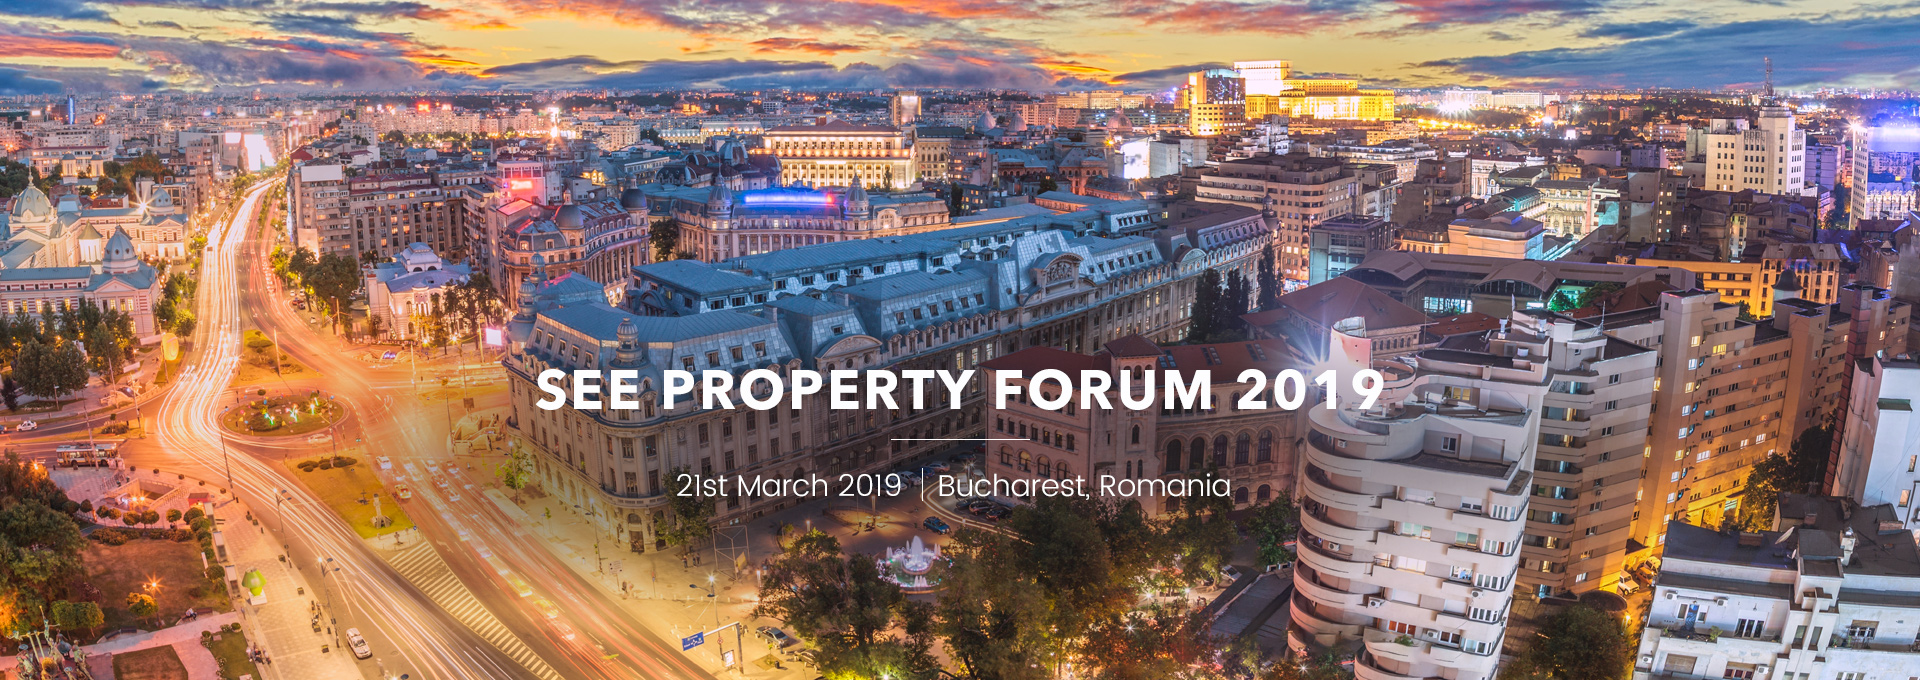 SEE_Property_Forum_2019_ROFMA